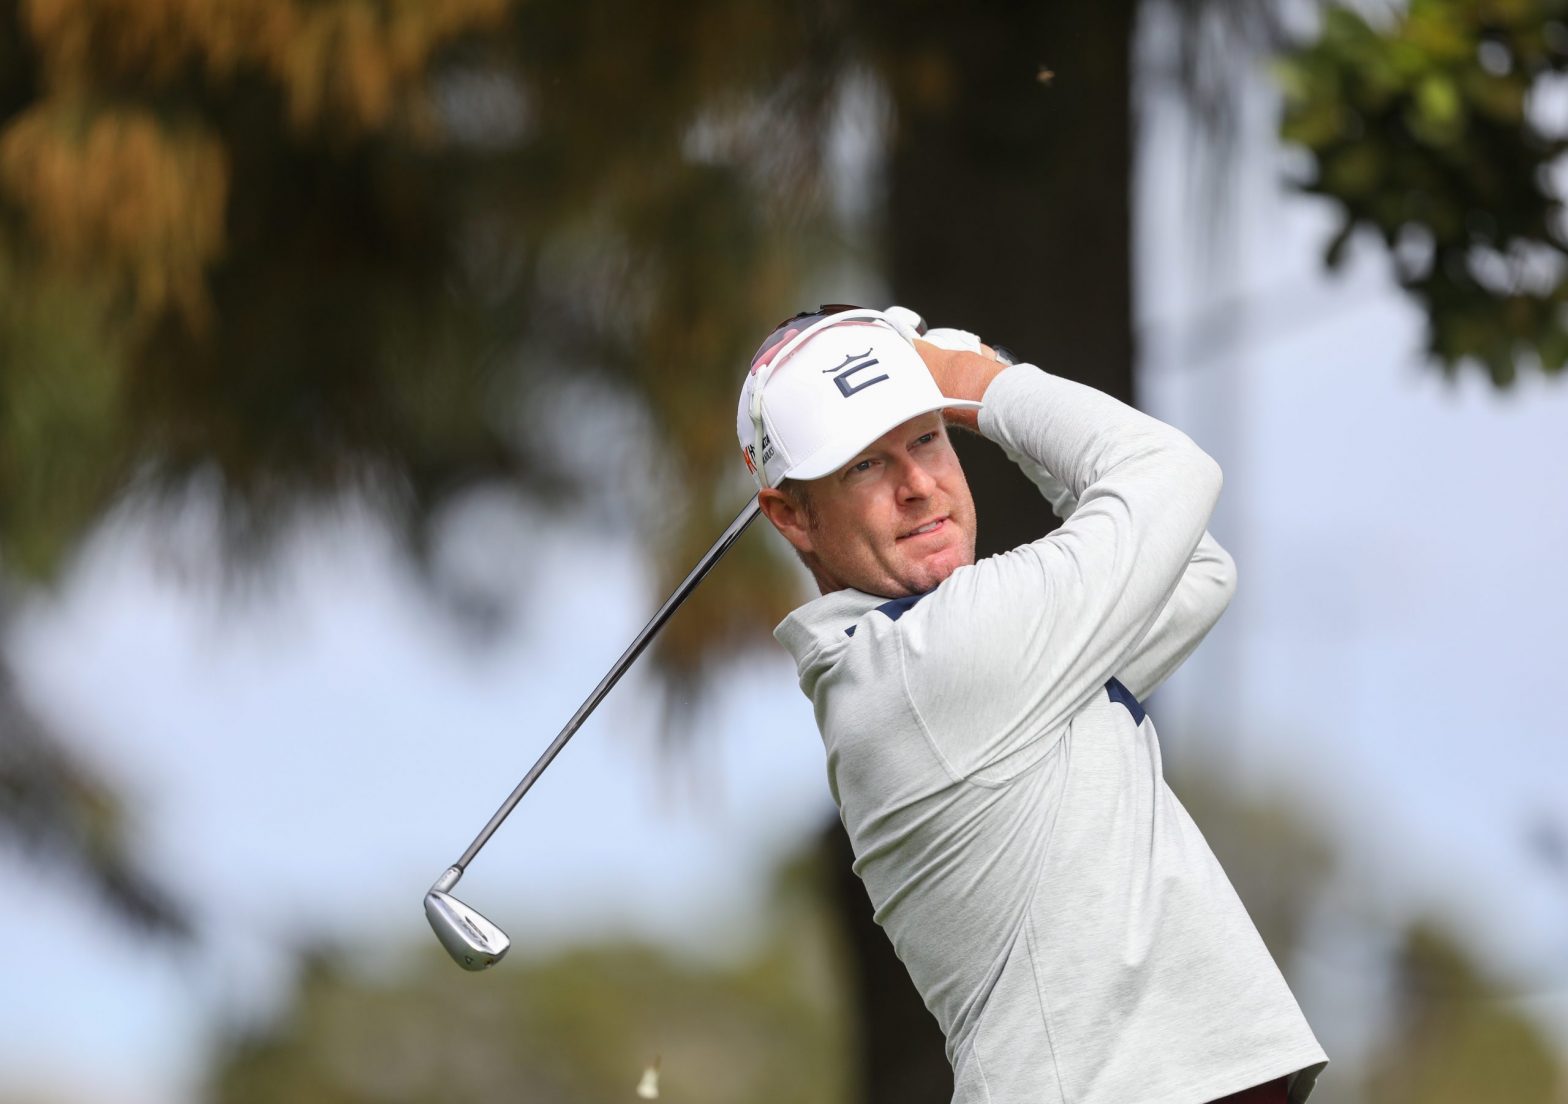 Blaauw leads on blustery opening day at Royal Cape